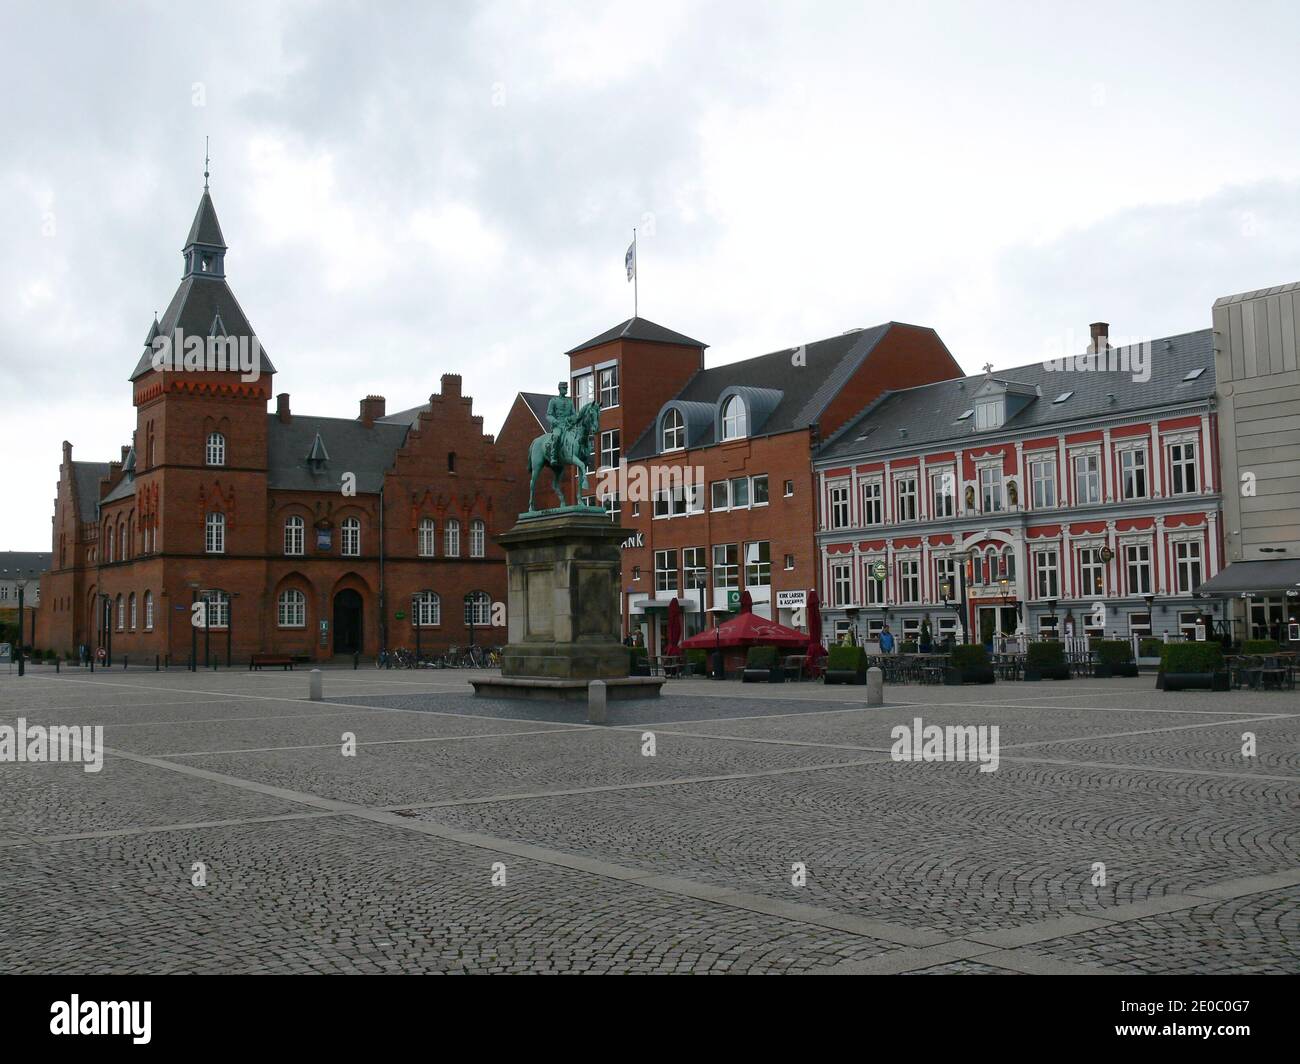 DENMARK, ESBJERG - SEPTEMBER 25, 2007: Esbjerg city centre with Christian IX statue and the building of the Tourist Office Stock Photo